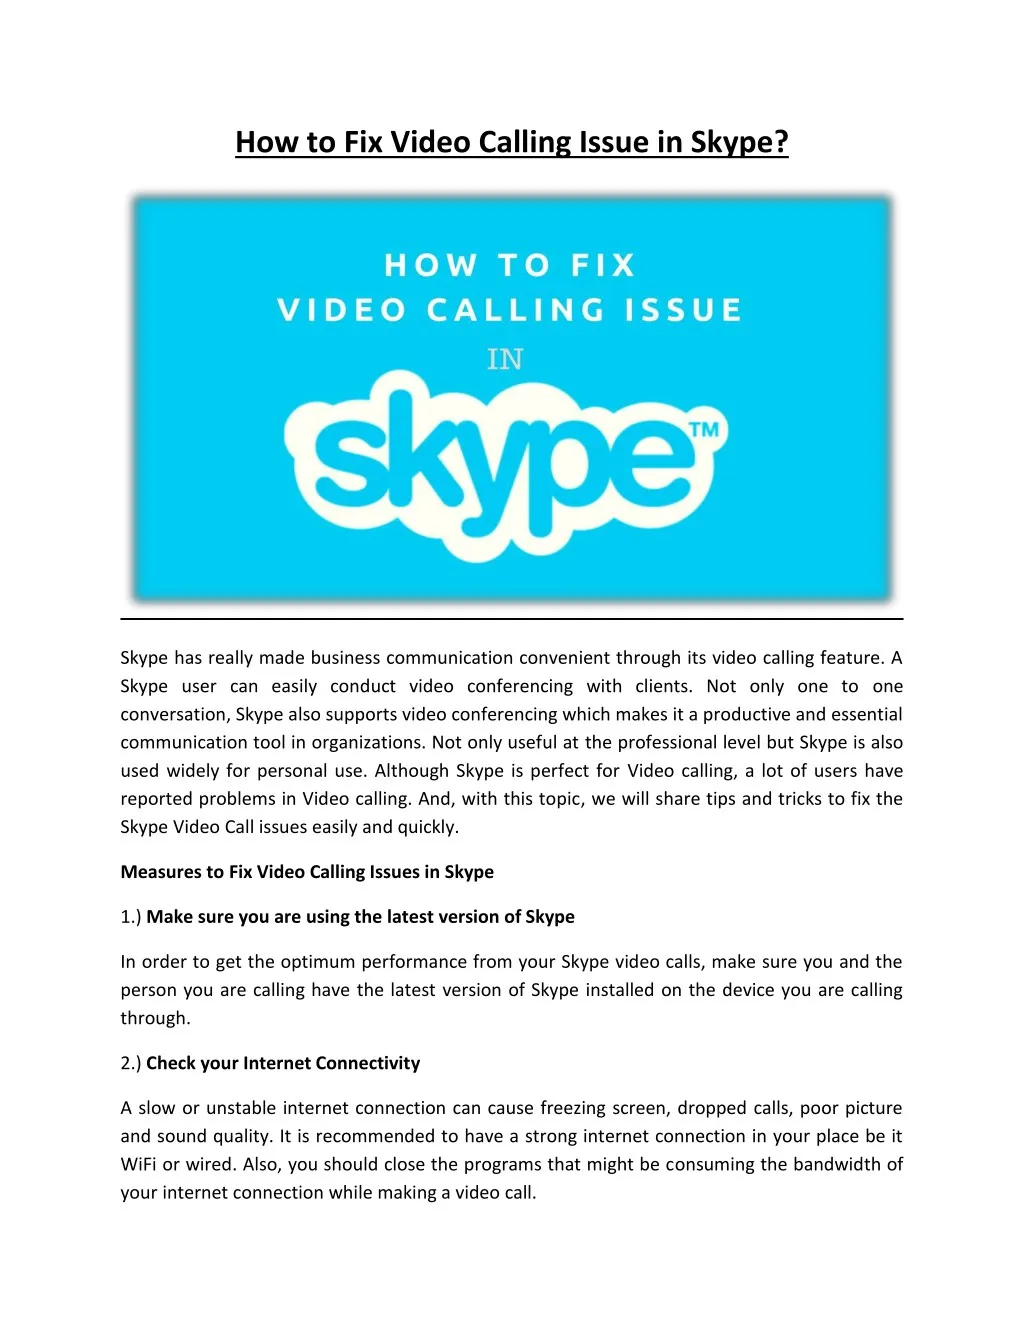 how to fix video calling issue in skype